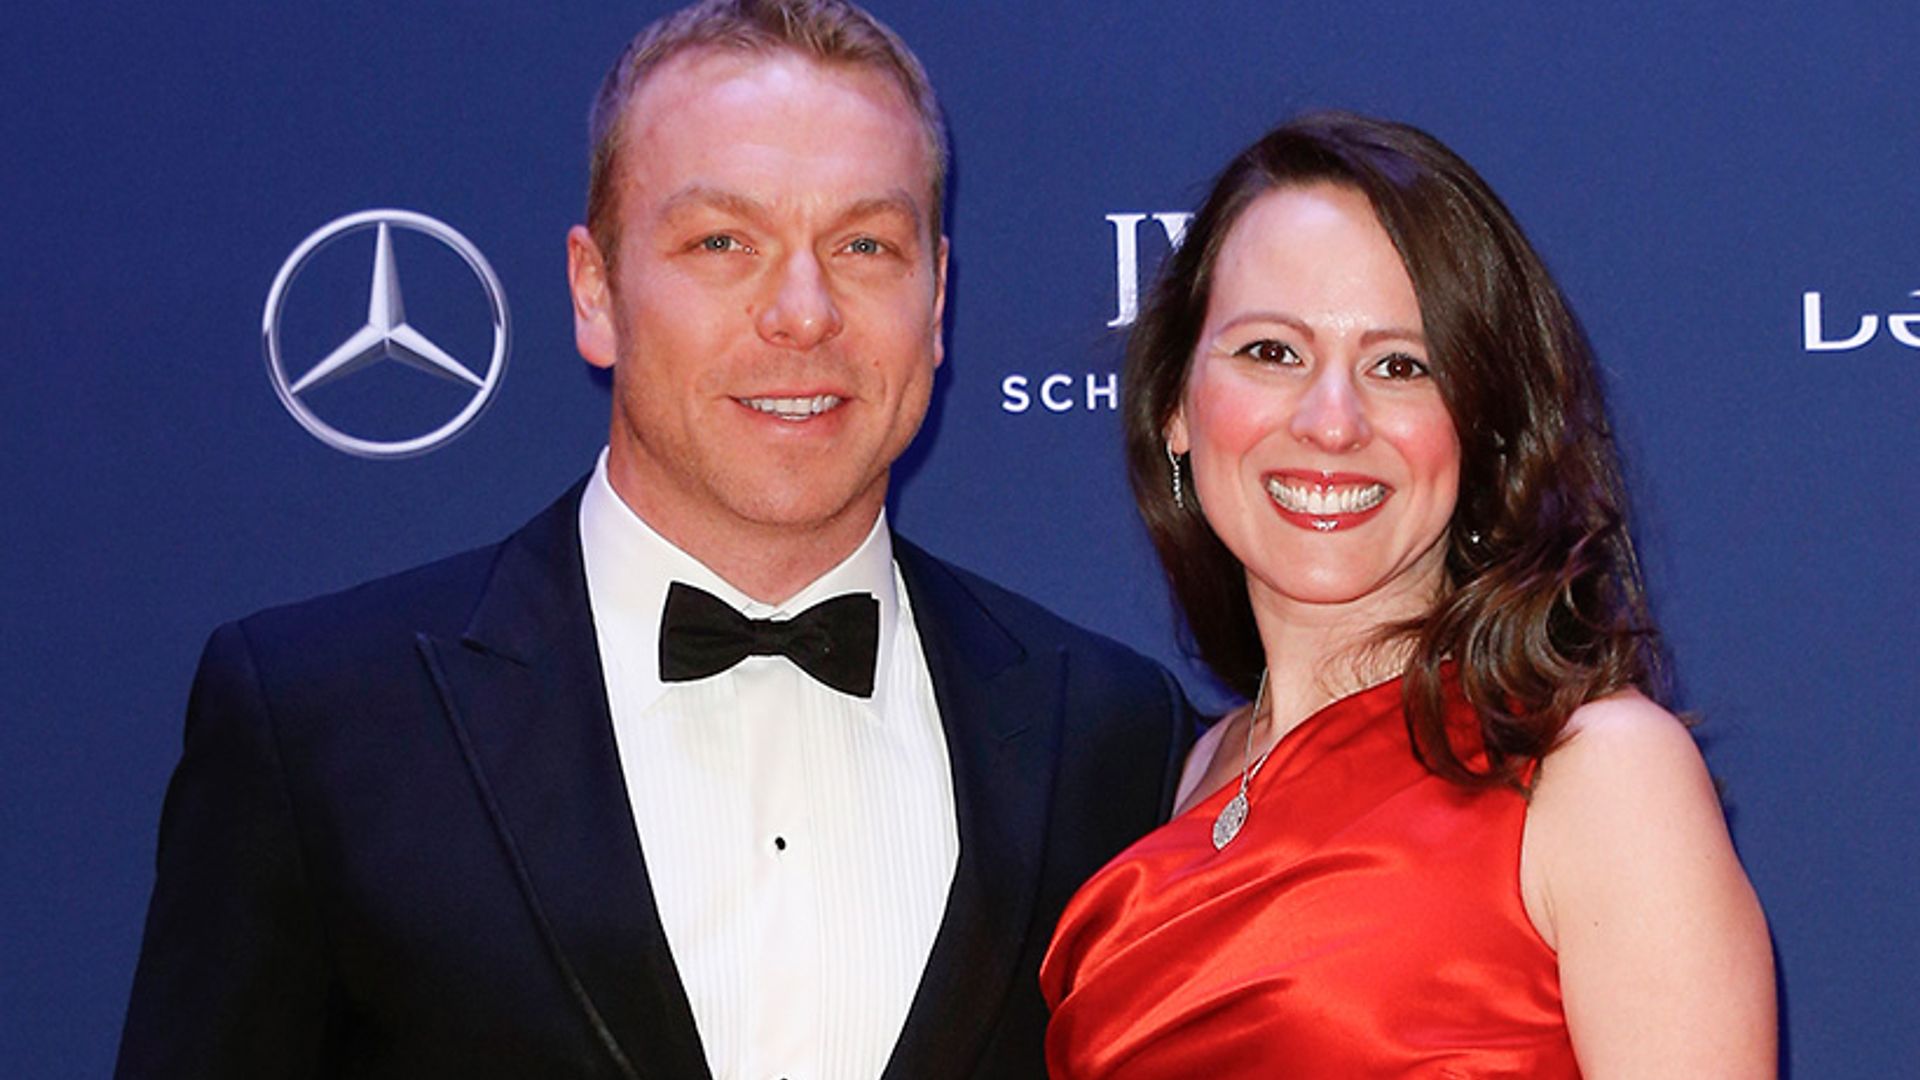 Sir Chris Hoy and wife Sarra welcome second baby - see the sweet photos!